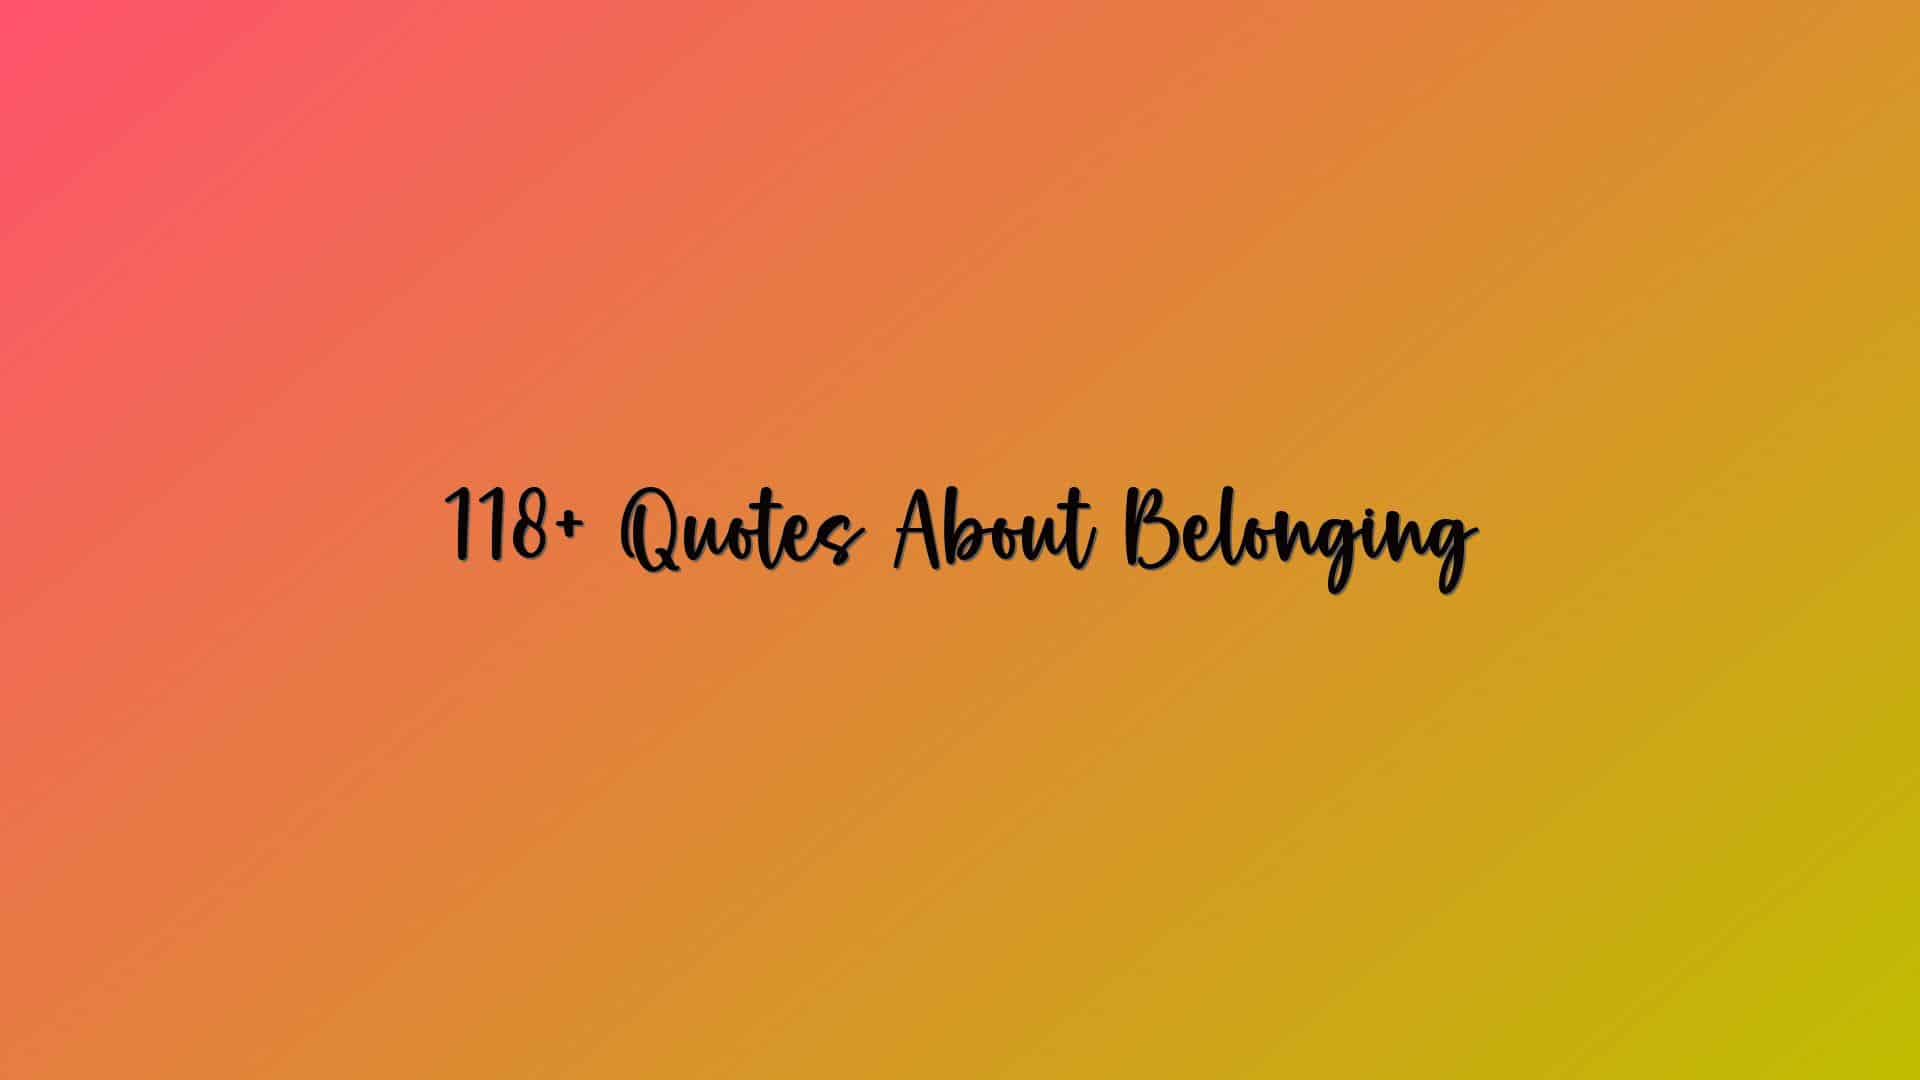 118+ Quotes About Belonging